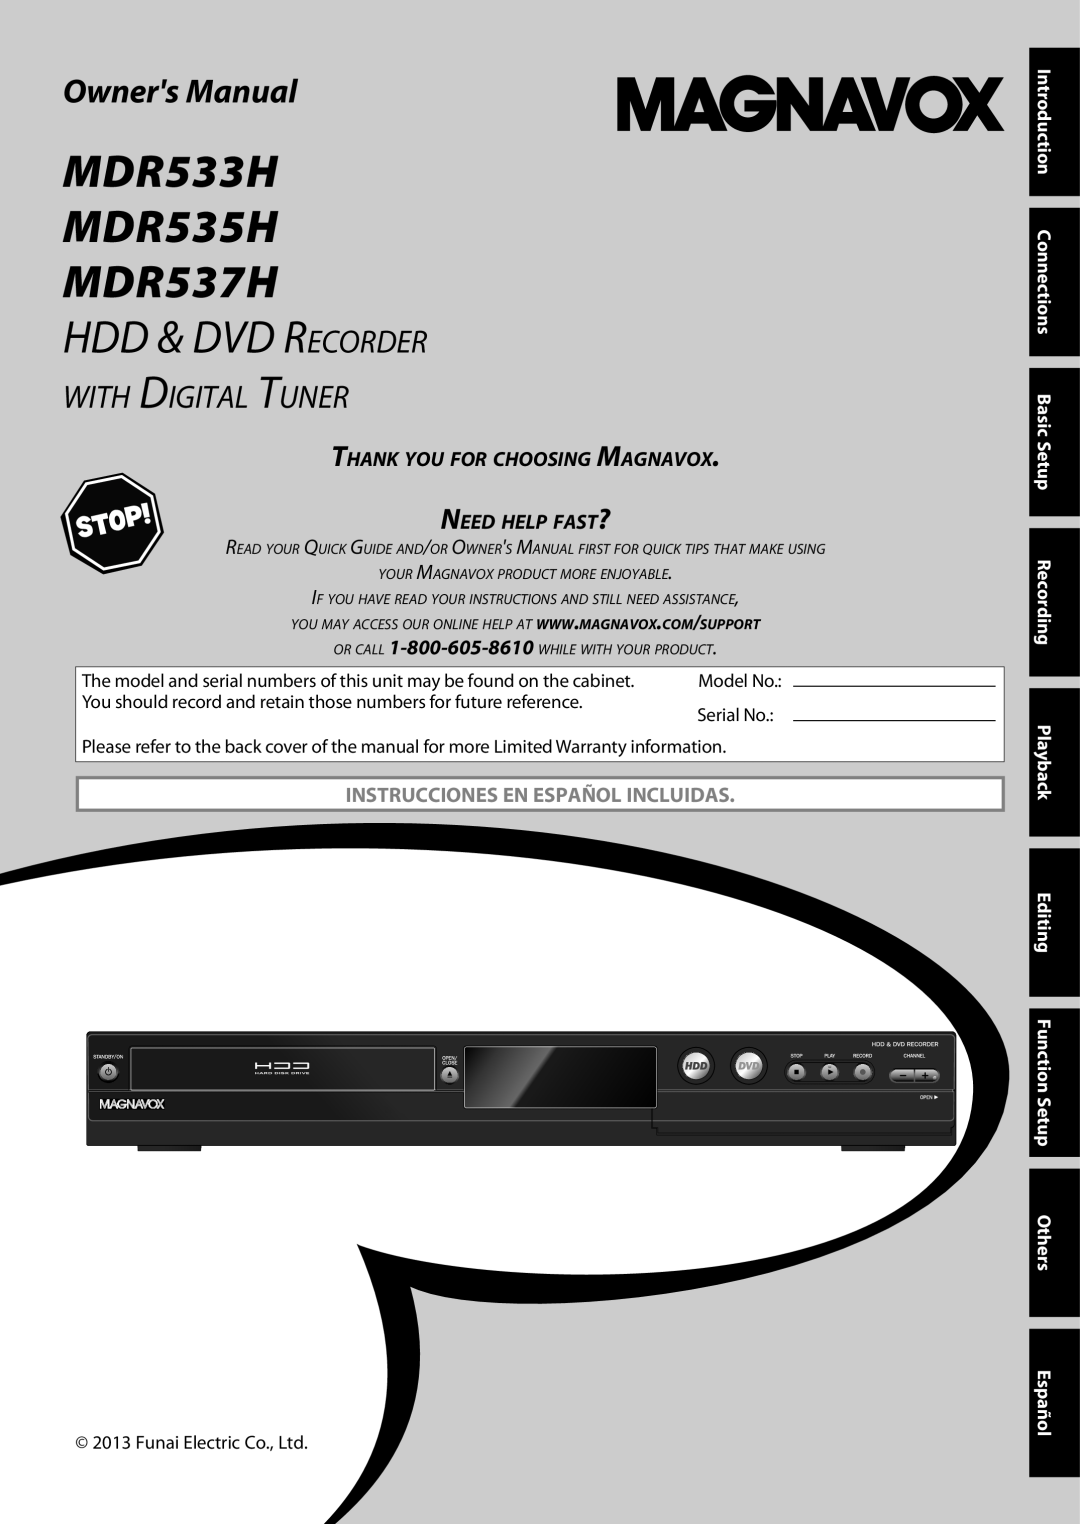 Magnavox owner manual Thank You For Choosing Magnavox Need Help Fast?, MDR533H MDR535H MDR537H, Hdd & Dvd Recorder 